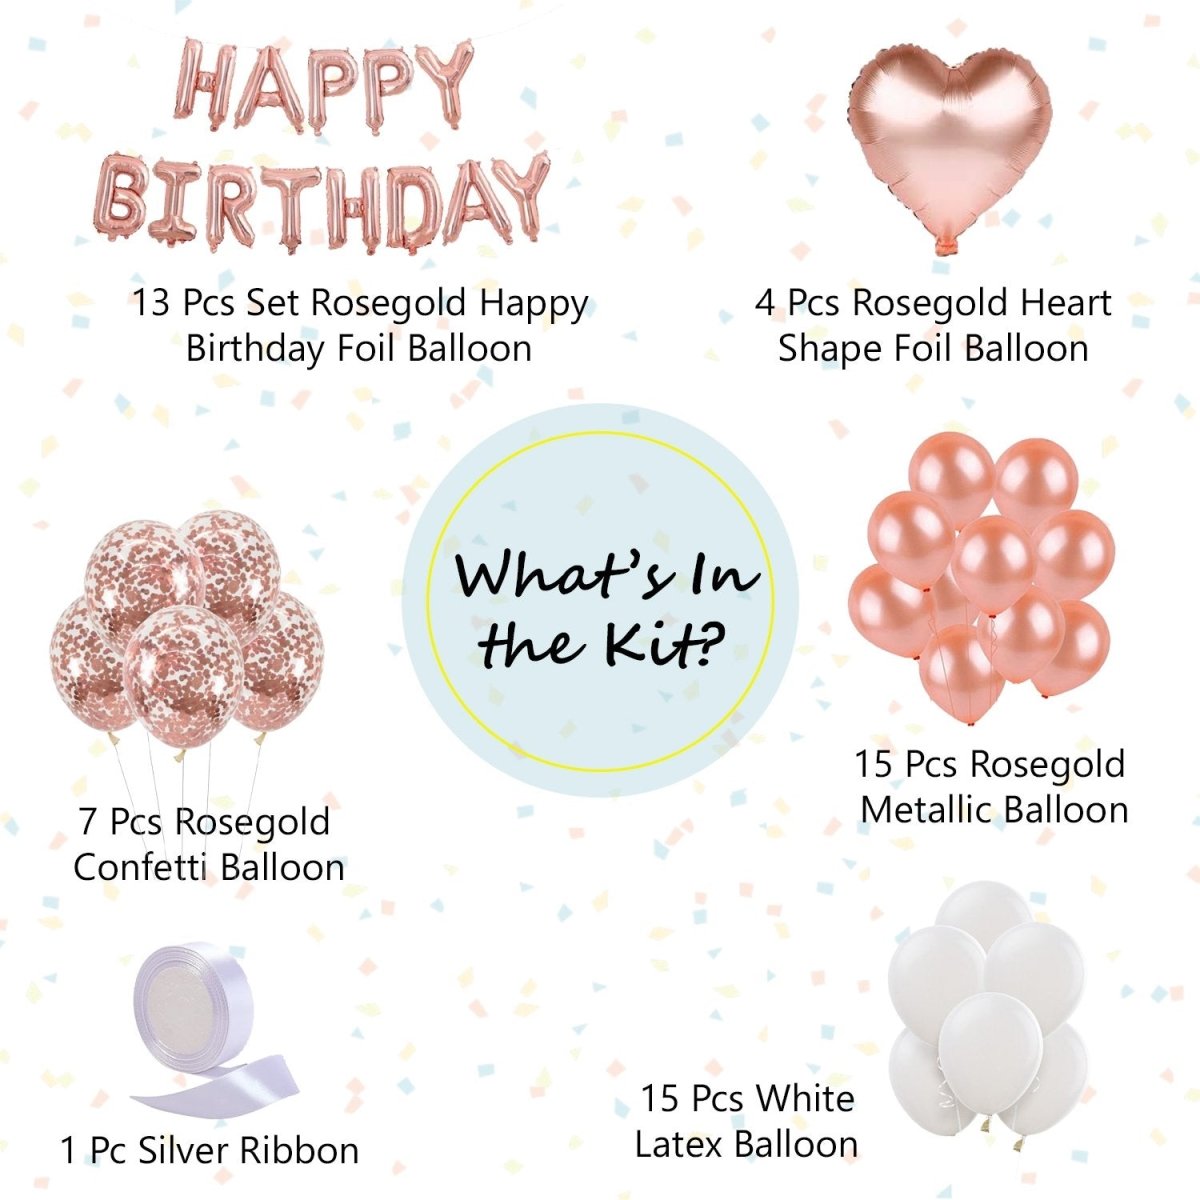 Rosegold Birthday Decoration Party Supplies Kit – Pack of 55 – Happy Birthday Foil, Heart Shape Foil, Confetti, Metallic & Latex Balloons - for Husband, Wife, Boy, Girl freeshipping - CherishX Partystore